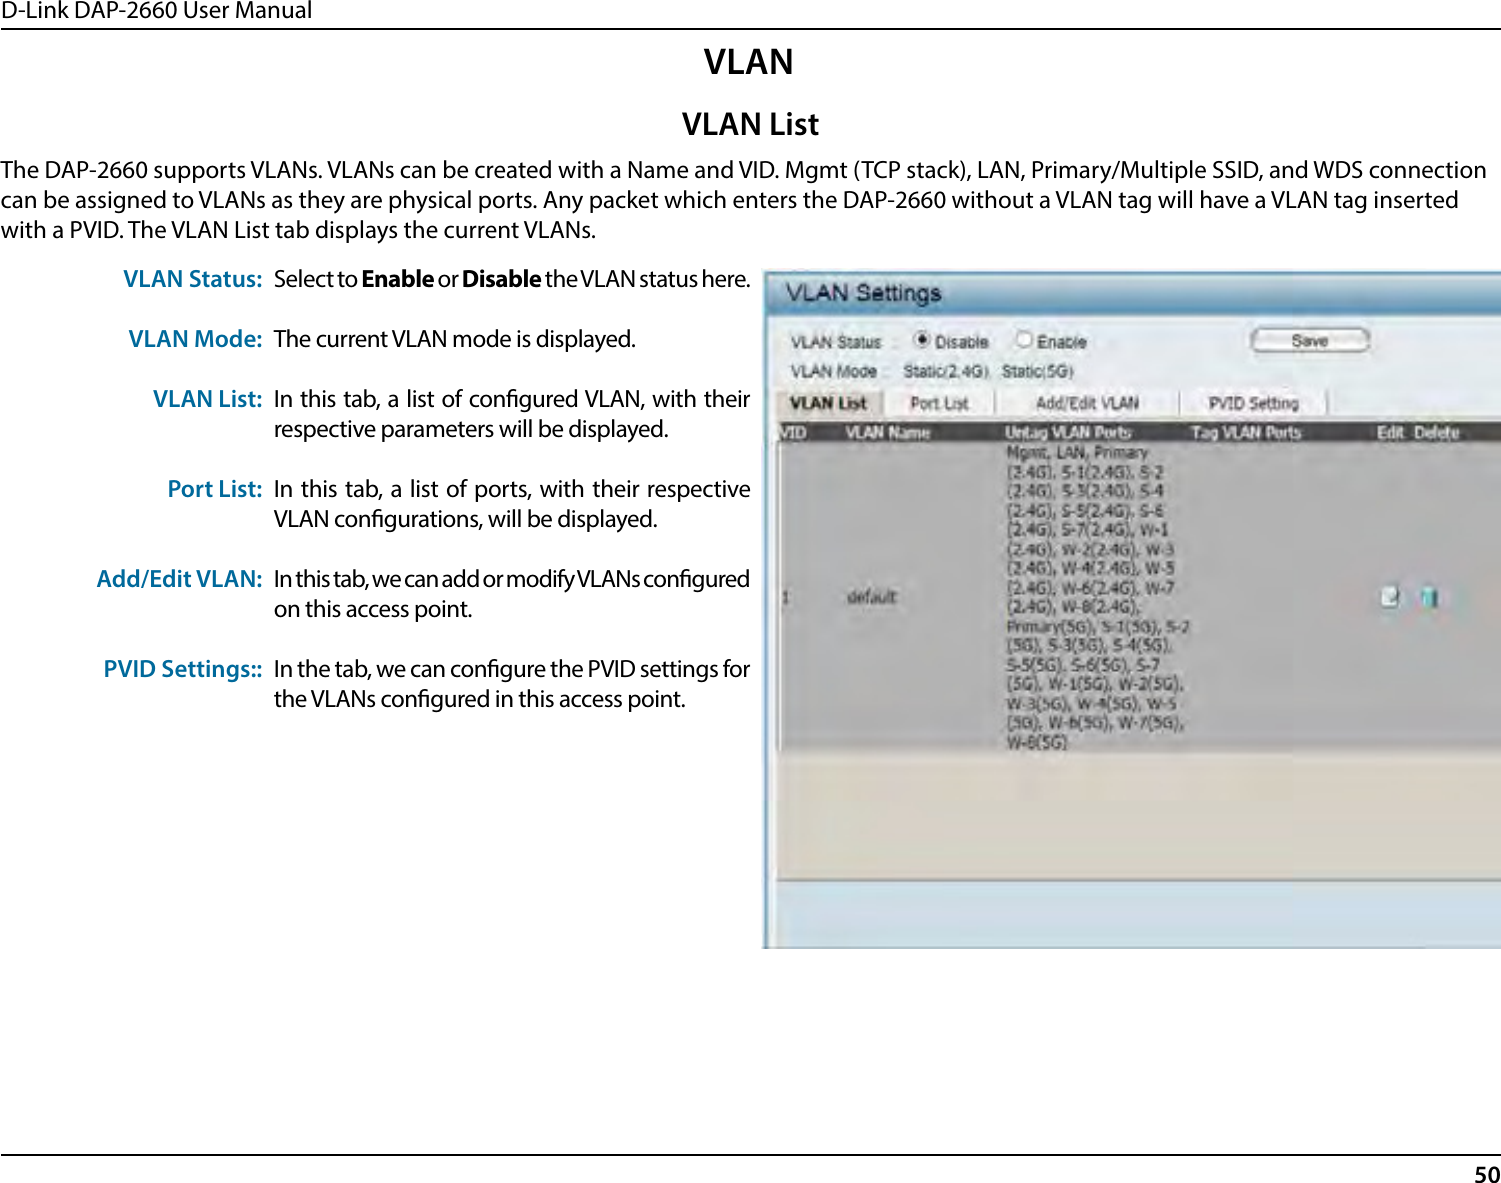 D-Link DAP-2660 User Manual50VLANThe DAP-2660 supports VLANs. VLANs can be created with a Name and VID. Mgmt (TCP stack), LAN, Primary/Multiple SSID, and WDS connection can be assigned to VLANs as they are physical ports. Any packet which enters the DAP-2660 without a VLAN tag will have a VLAN tag inserted with a PVID. The VLAN List tab displays the current VLANs.VLAN Status:VLAN Mode:VLAN List:Port List:Add/Edit VLAN:PVID Settings::Select to Enable or Disable the VLAN status here.The current VLAN mode is displayed.In this tab, a list of congured VLAN, with their respective parameters will be displayed.In this tab, a list of ports, with their respective VLAN congurations, will be displayed.In this tab, we can add or modify VLANs congured on this access point.In the tab, we can congure the PVID settings for the VLANs congured in this access point.VLAN List